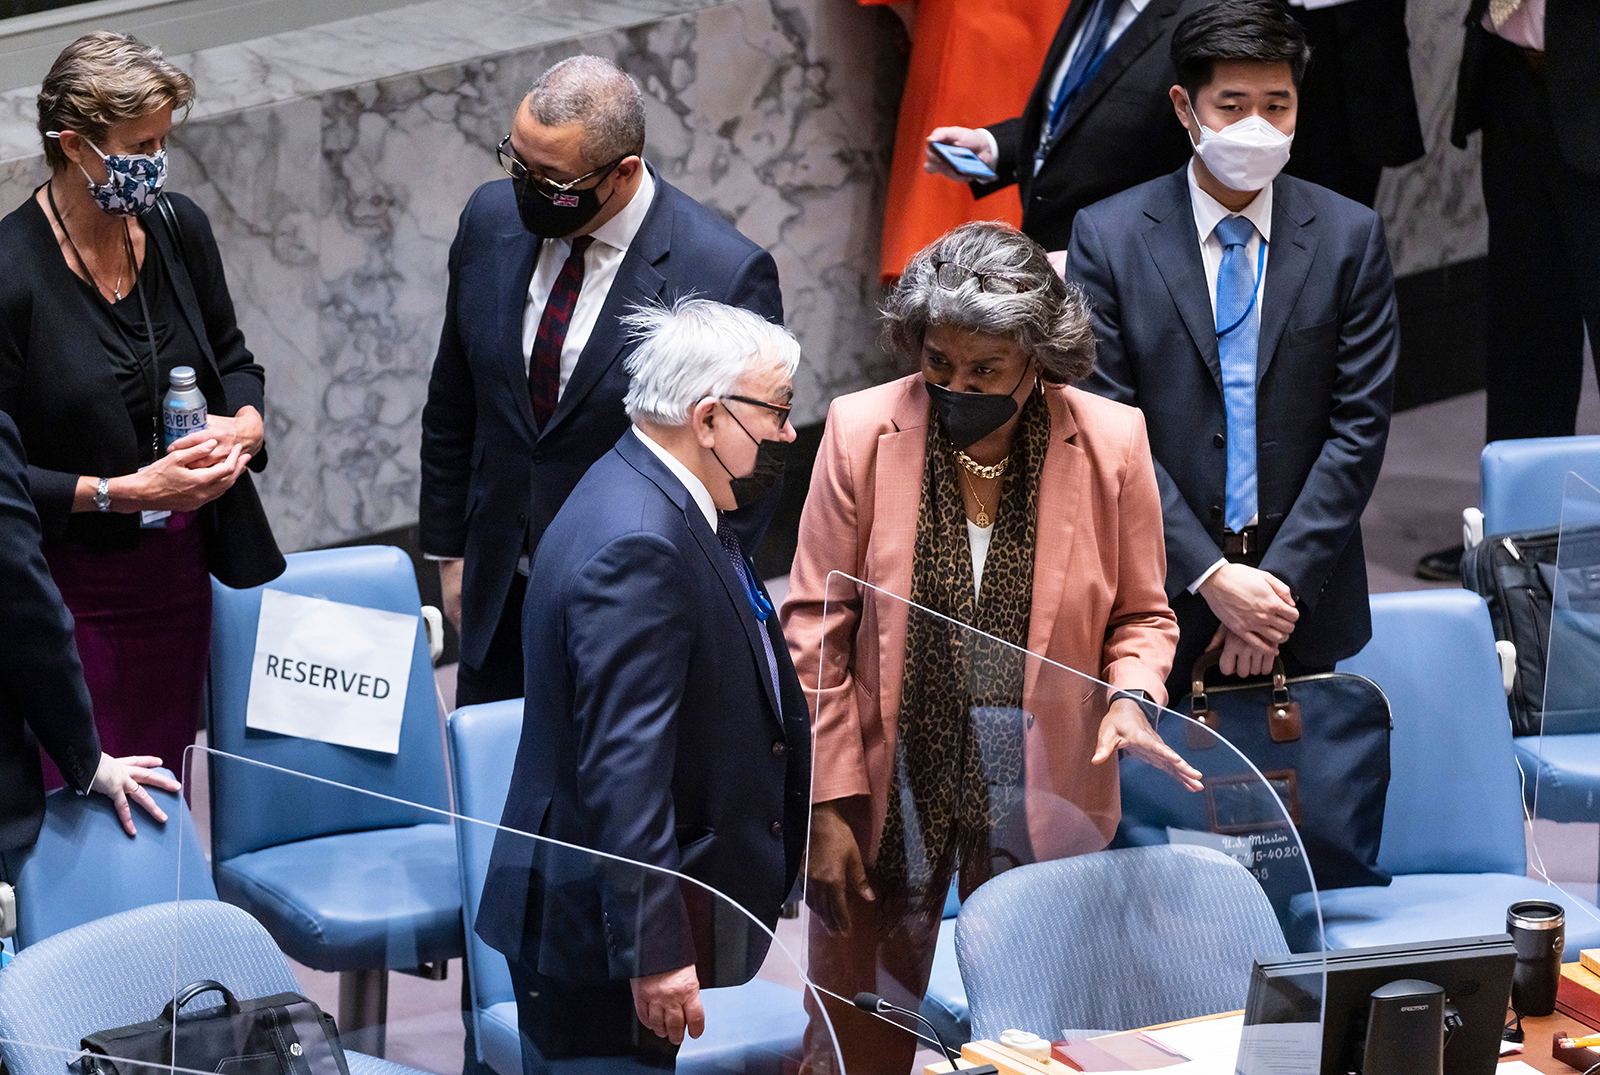 The US Ambassador to the UN Linda Thomas-Greenfield, second right, talks with Russia's Deputy Foreign Minister Sergey Vershinin at the start of a UN Security Council meeting on the tensions between Ukraine and Russia, on February 17.